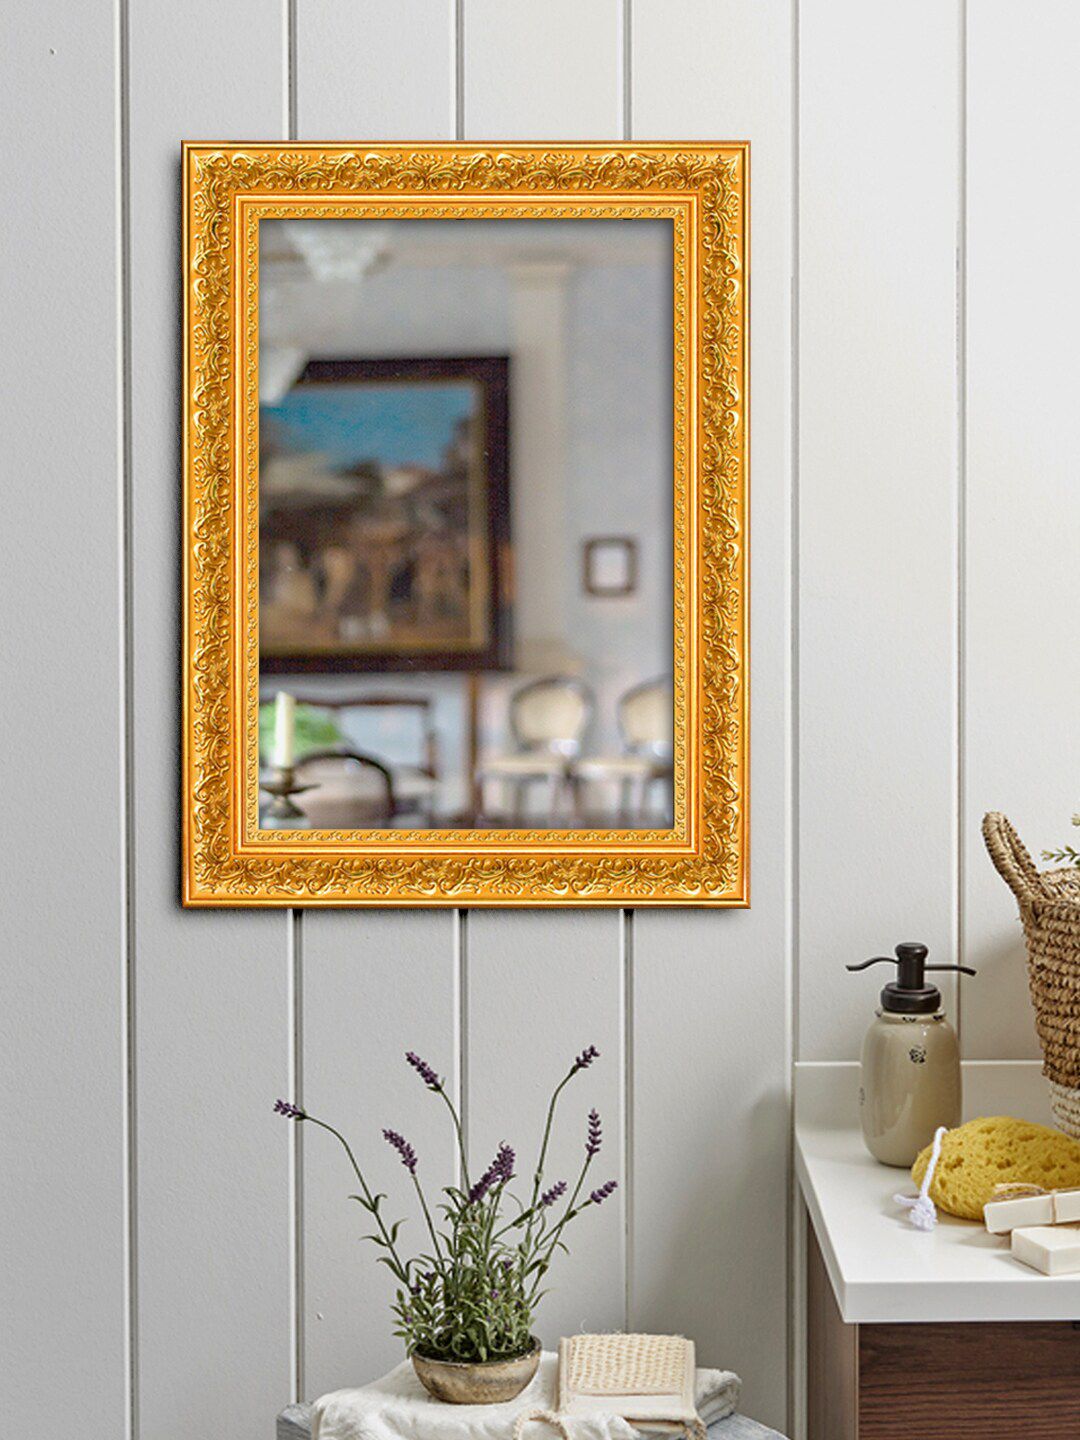 999Store Gold-Toned Textured Framed Wall Mirror Price in India